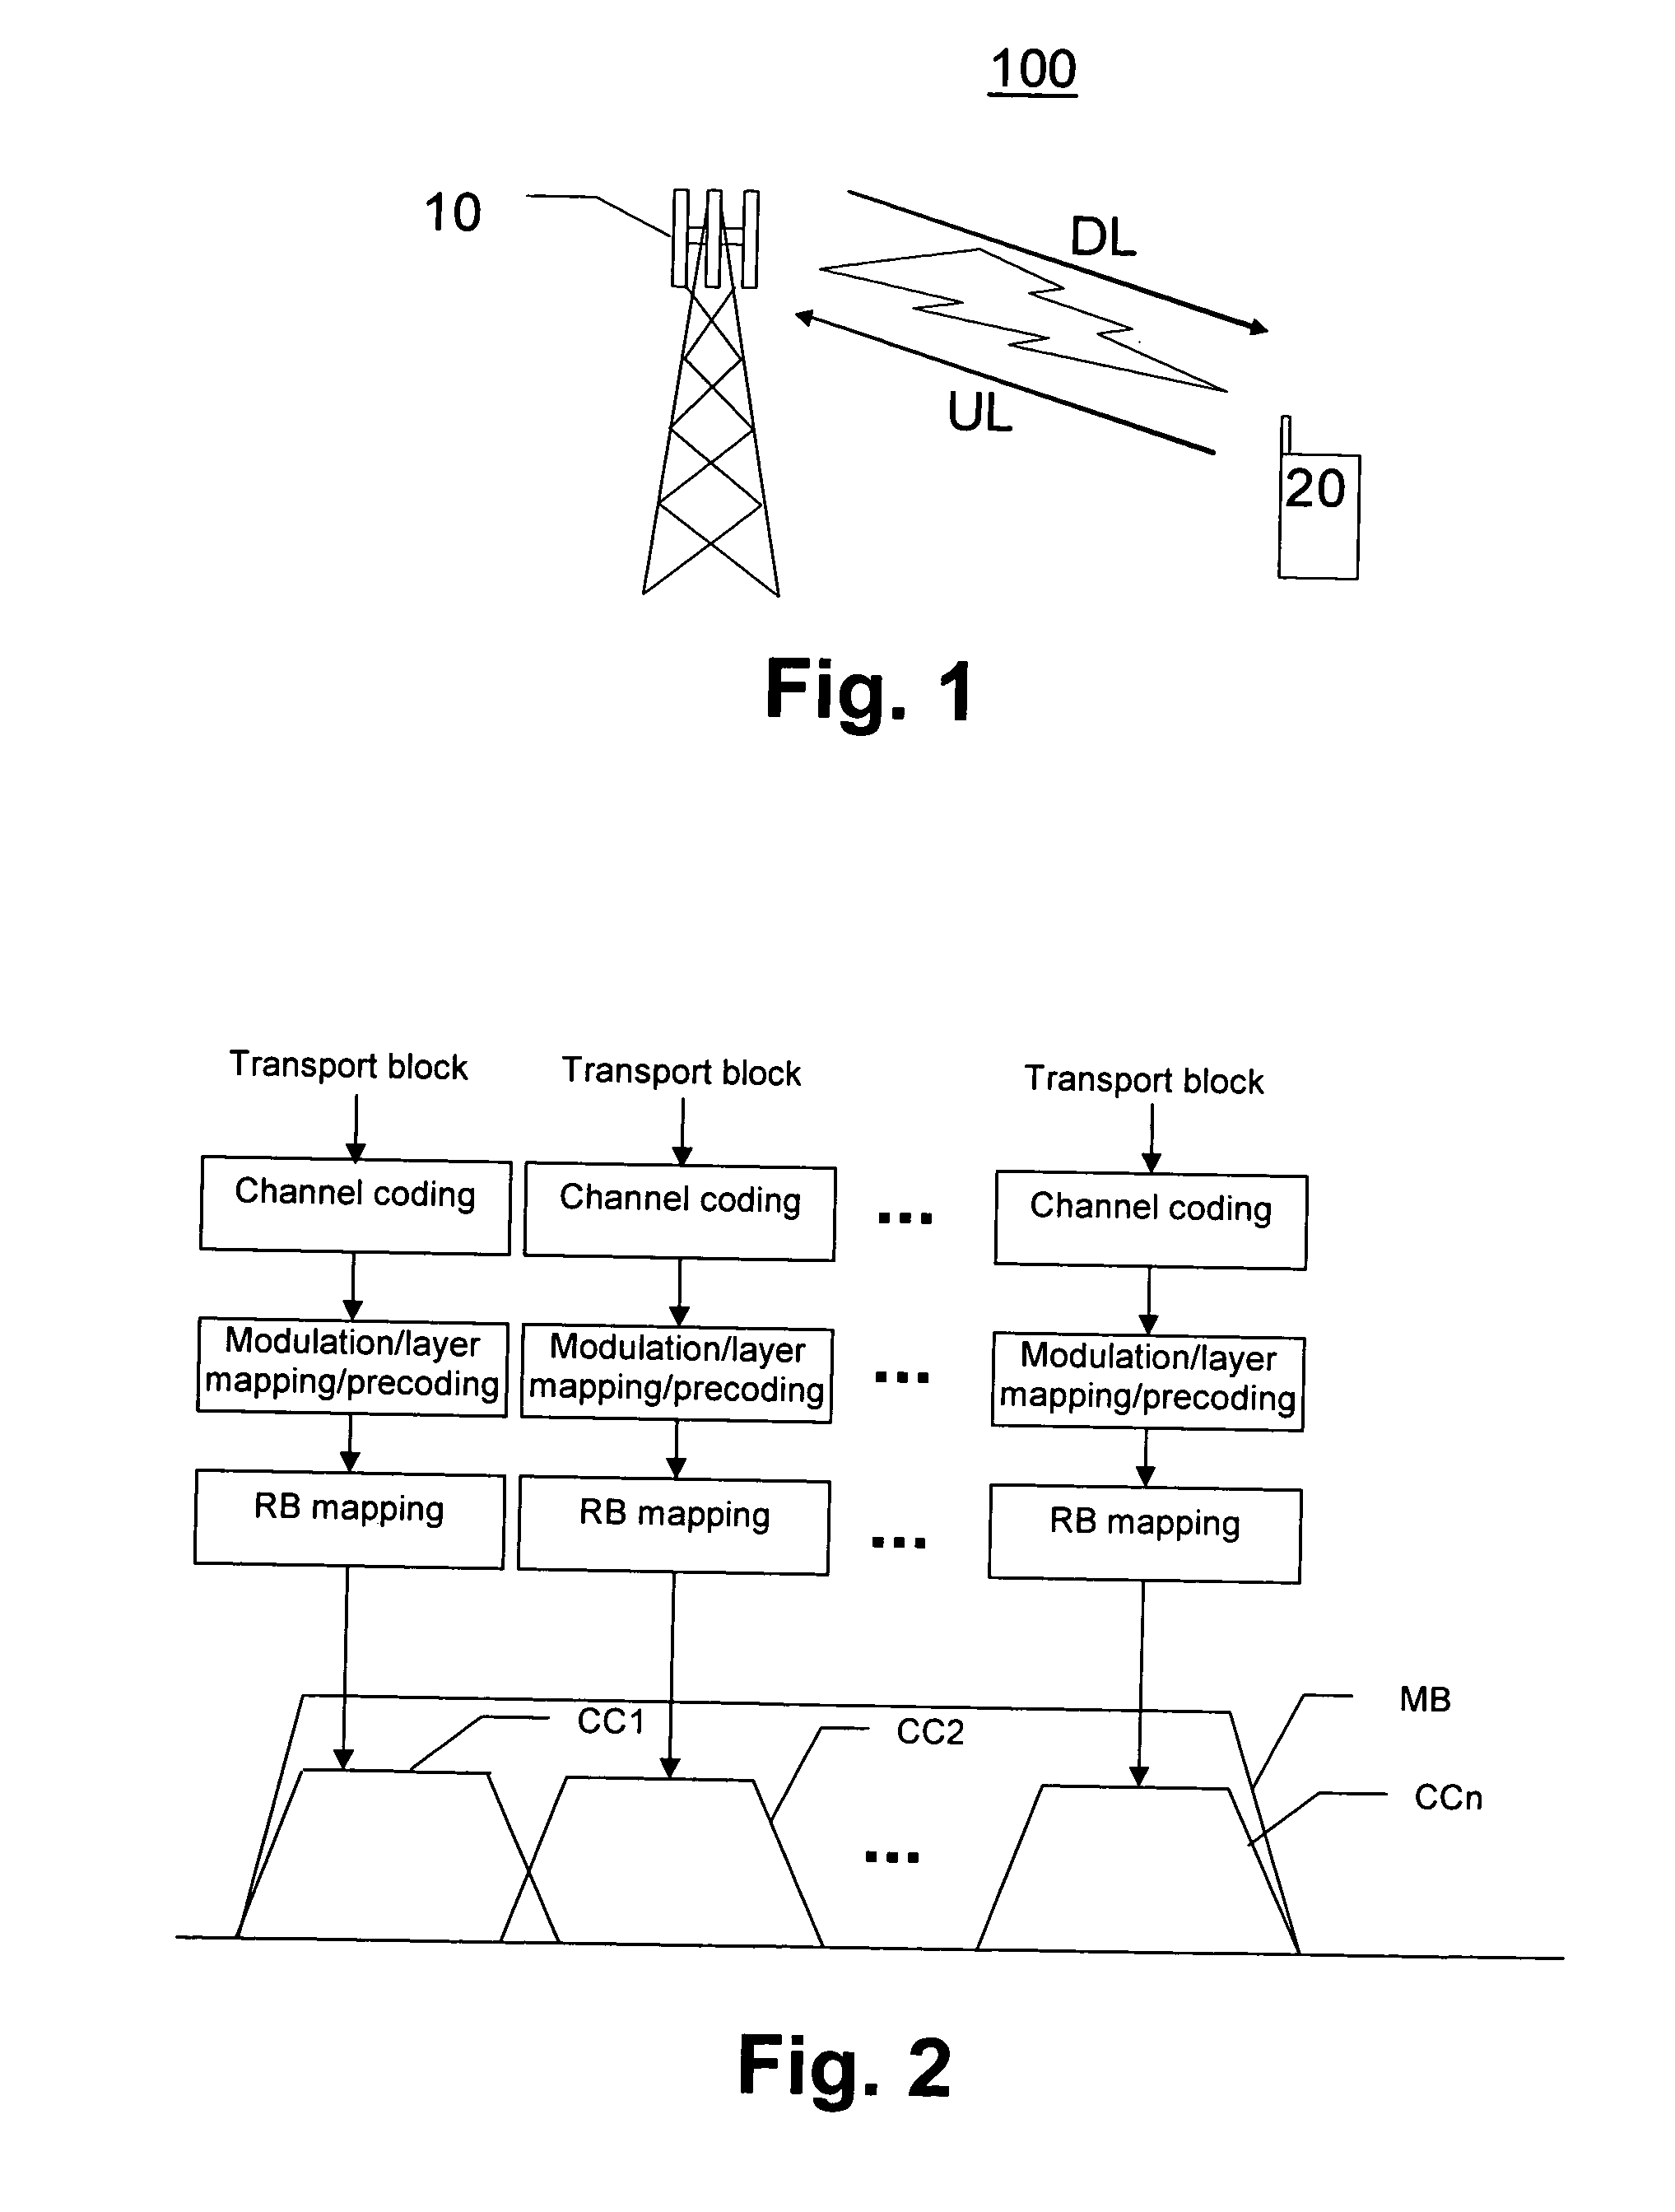 Overhead Reduction for Multi-Carrier Transmission Systems